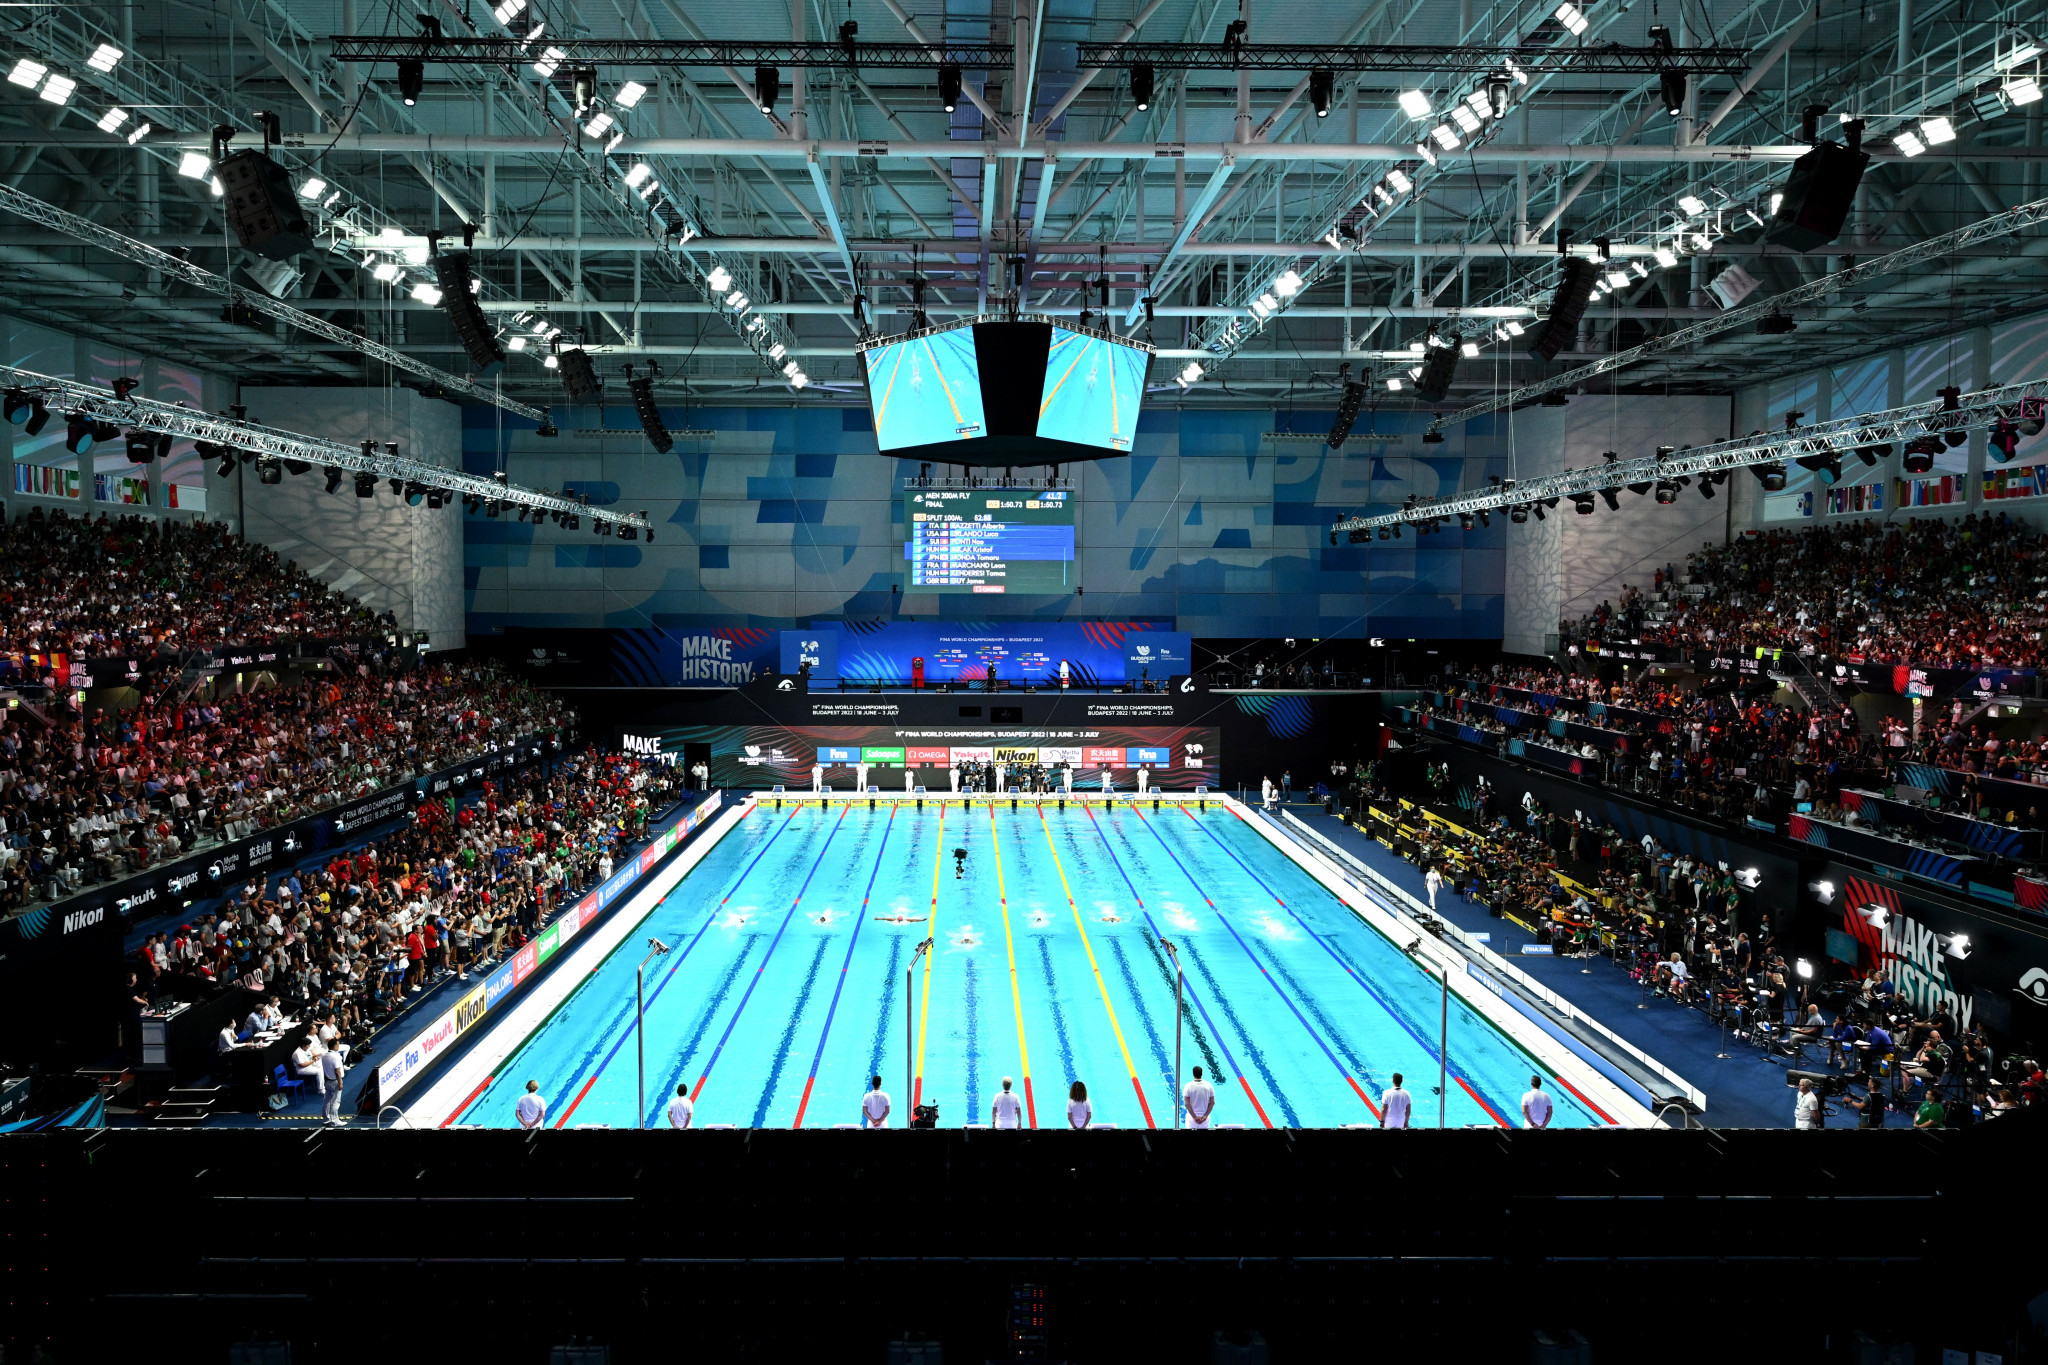 Duna Arena has held many major aquatics events since it was built in 2017 ©Getty Images